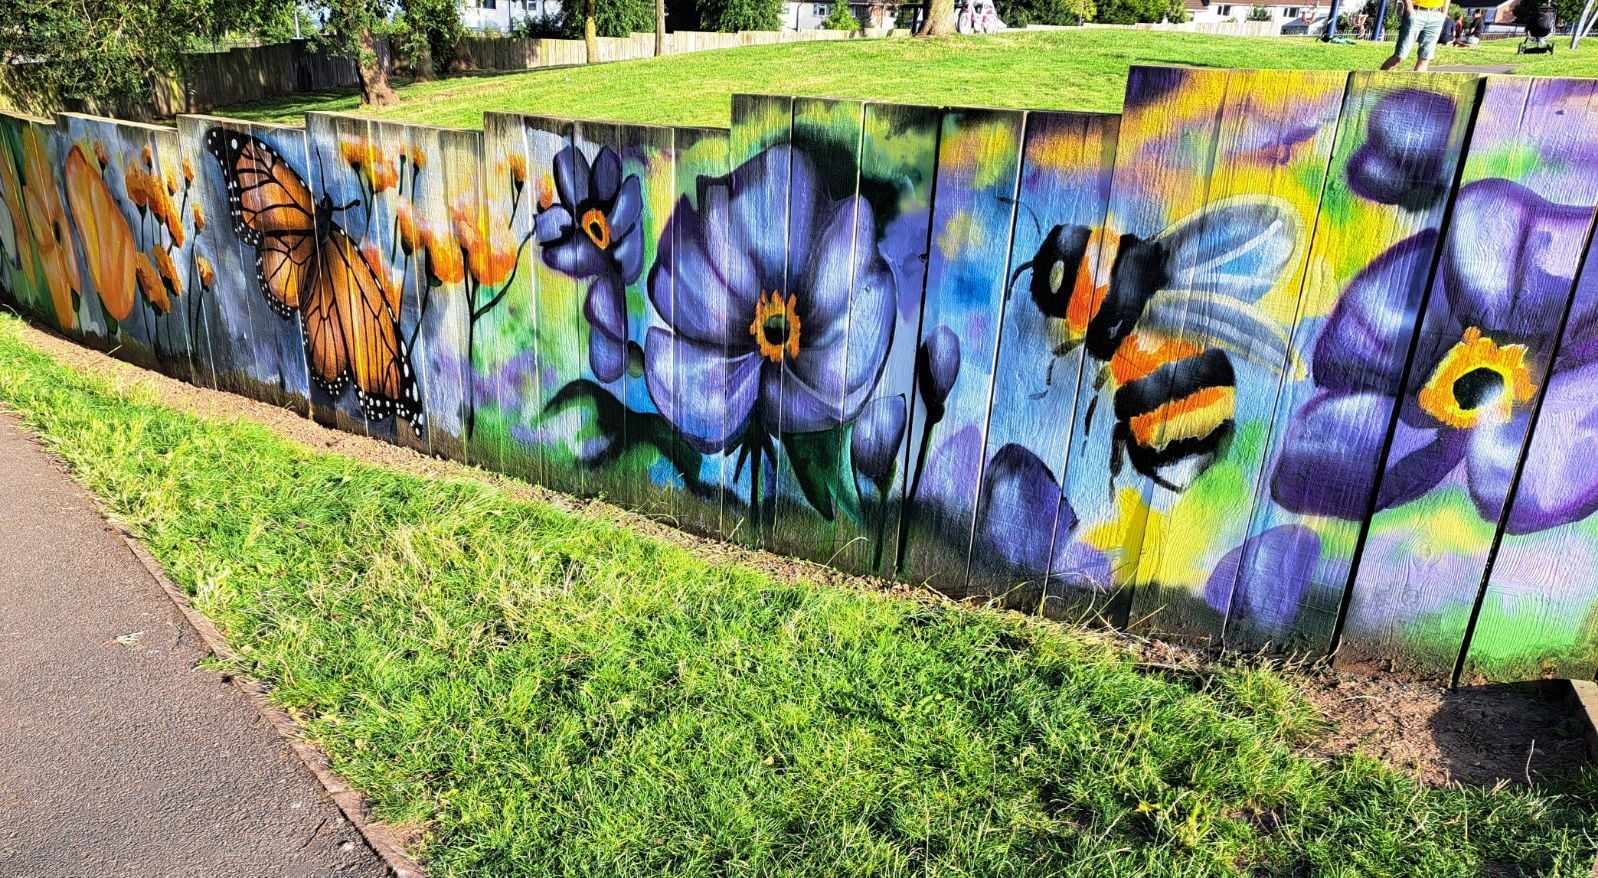 A striking painted fence